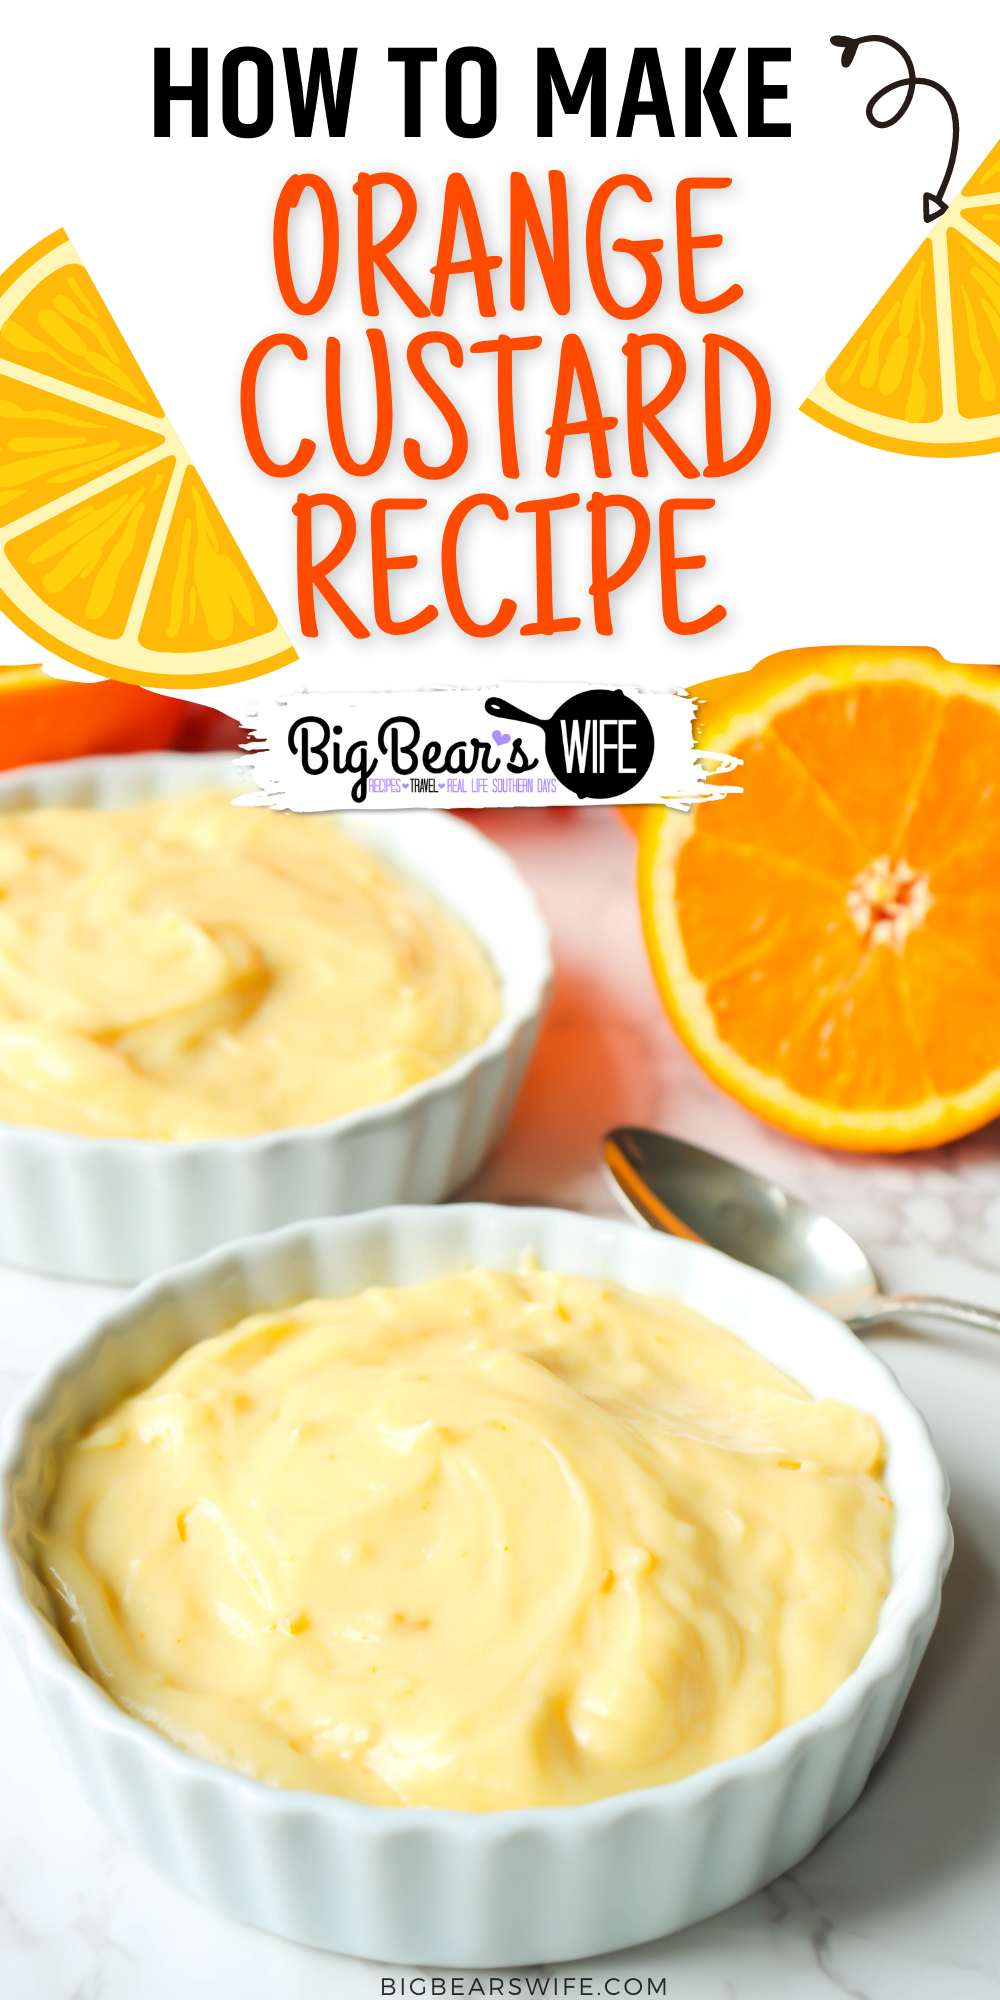 This Orange Custard is a  cold, creamy vintage custard recipe that is full of orange flavor and smooth like a thick homemade pudding!  via @bigbearswife